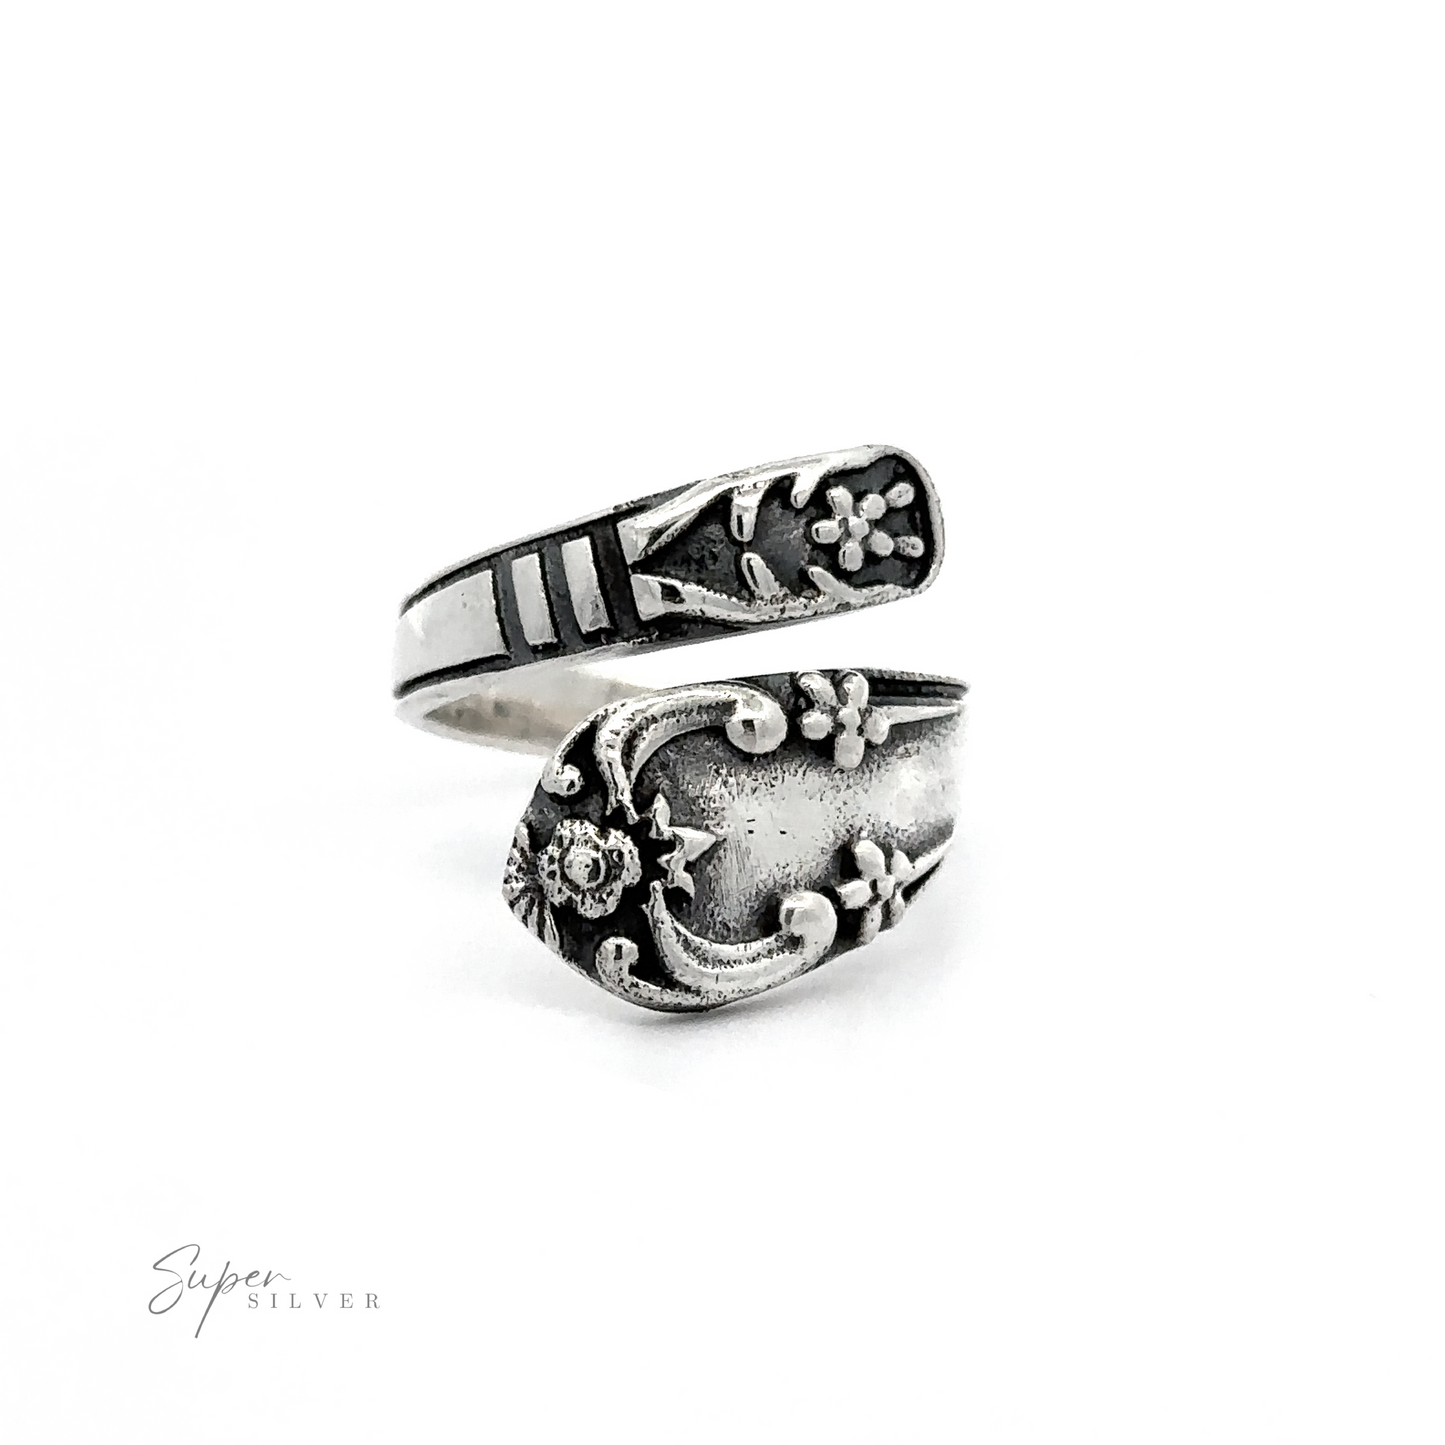 An ornate Spoon Design Ring with an adjustable band.